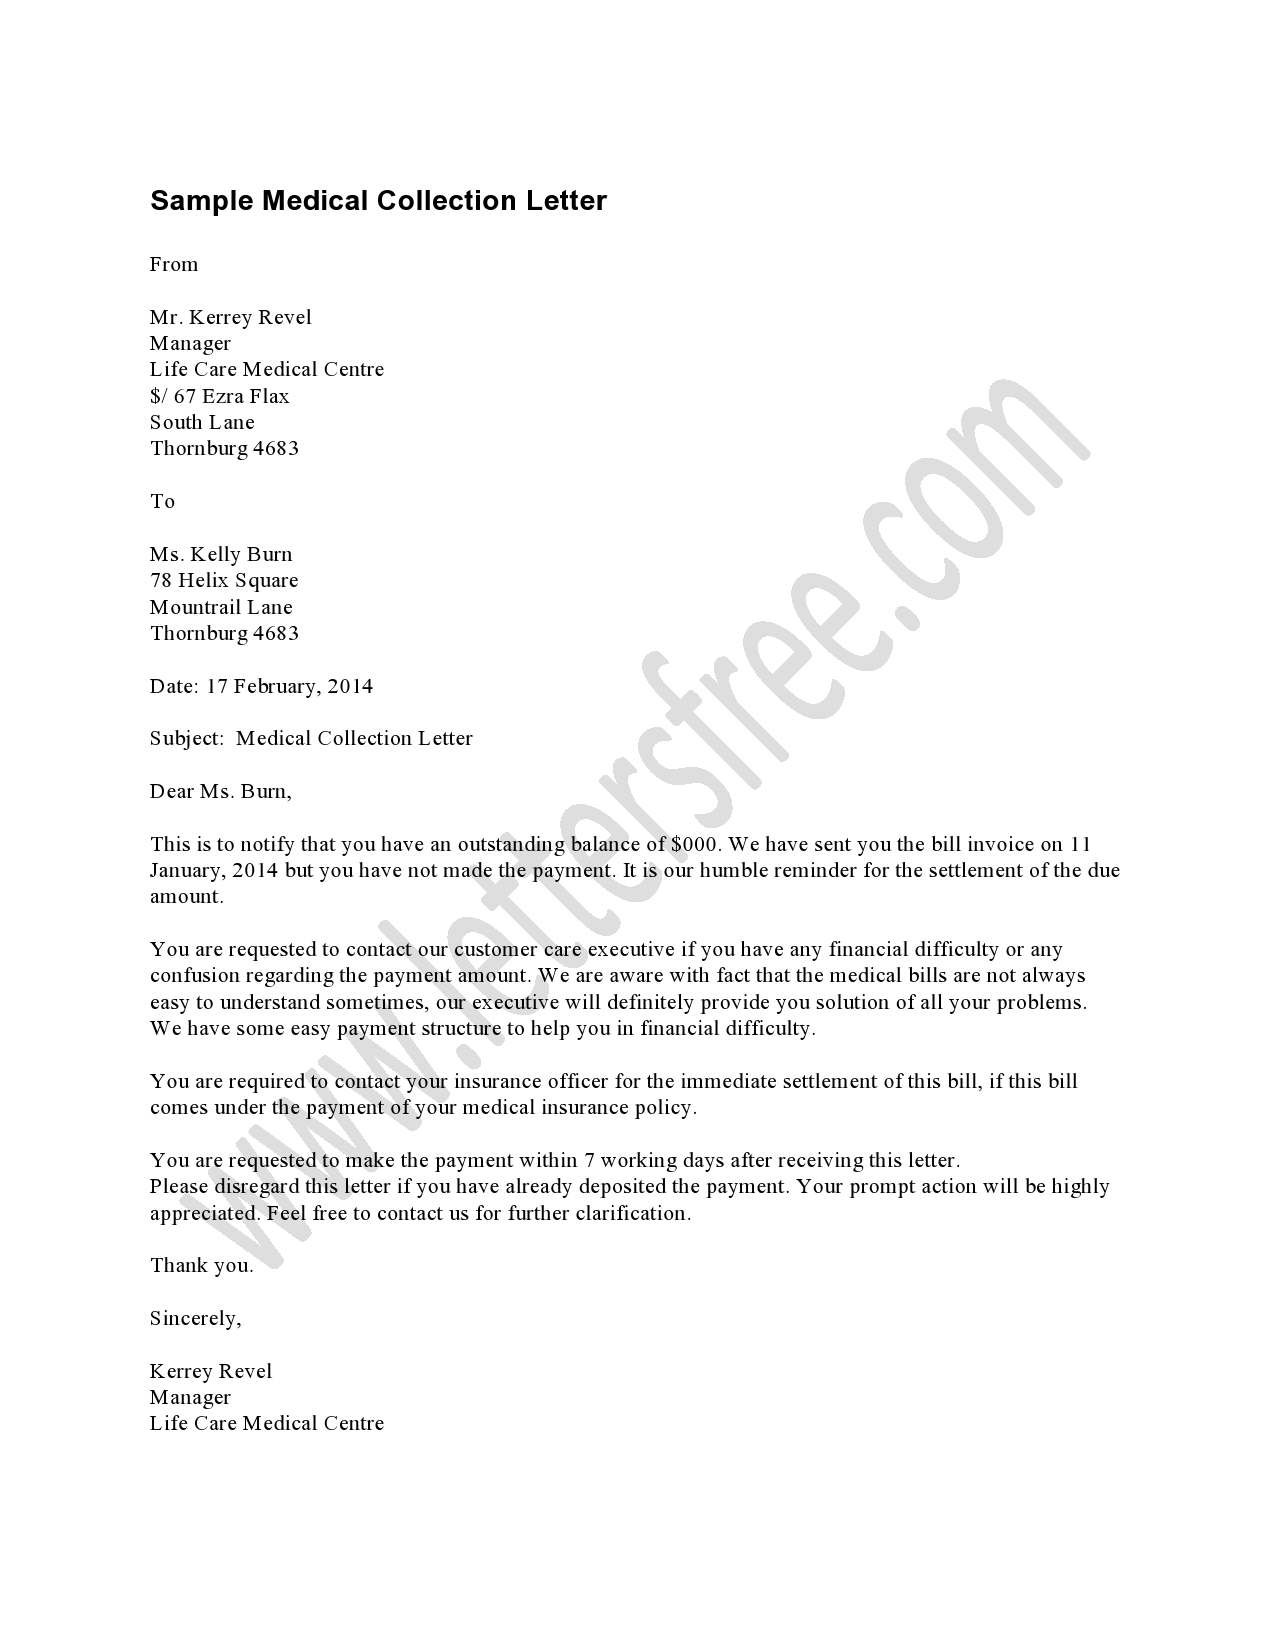 hipaa-letter-medical-collection-template-samples-letter-template